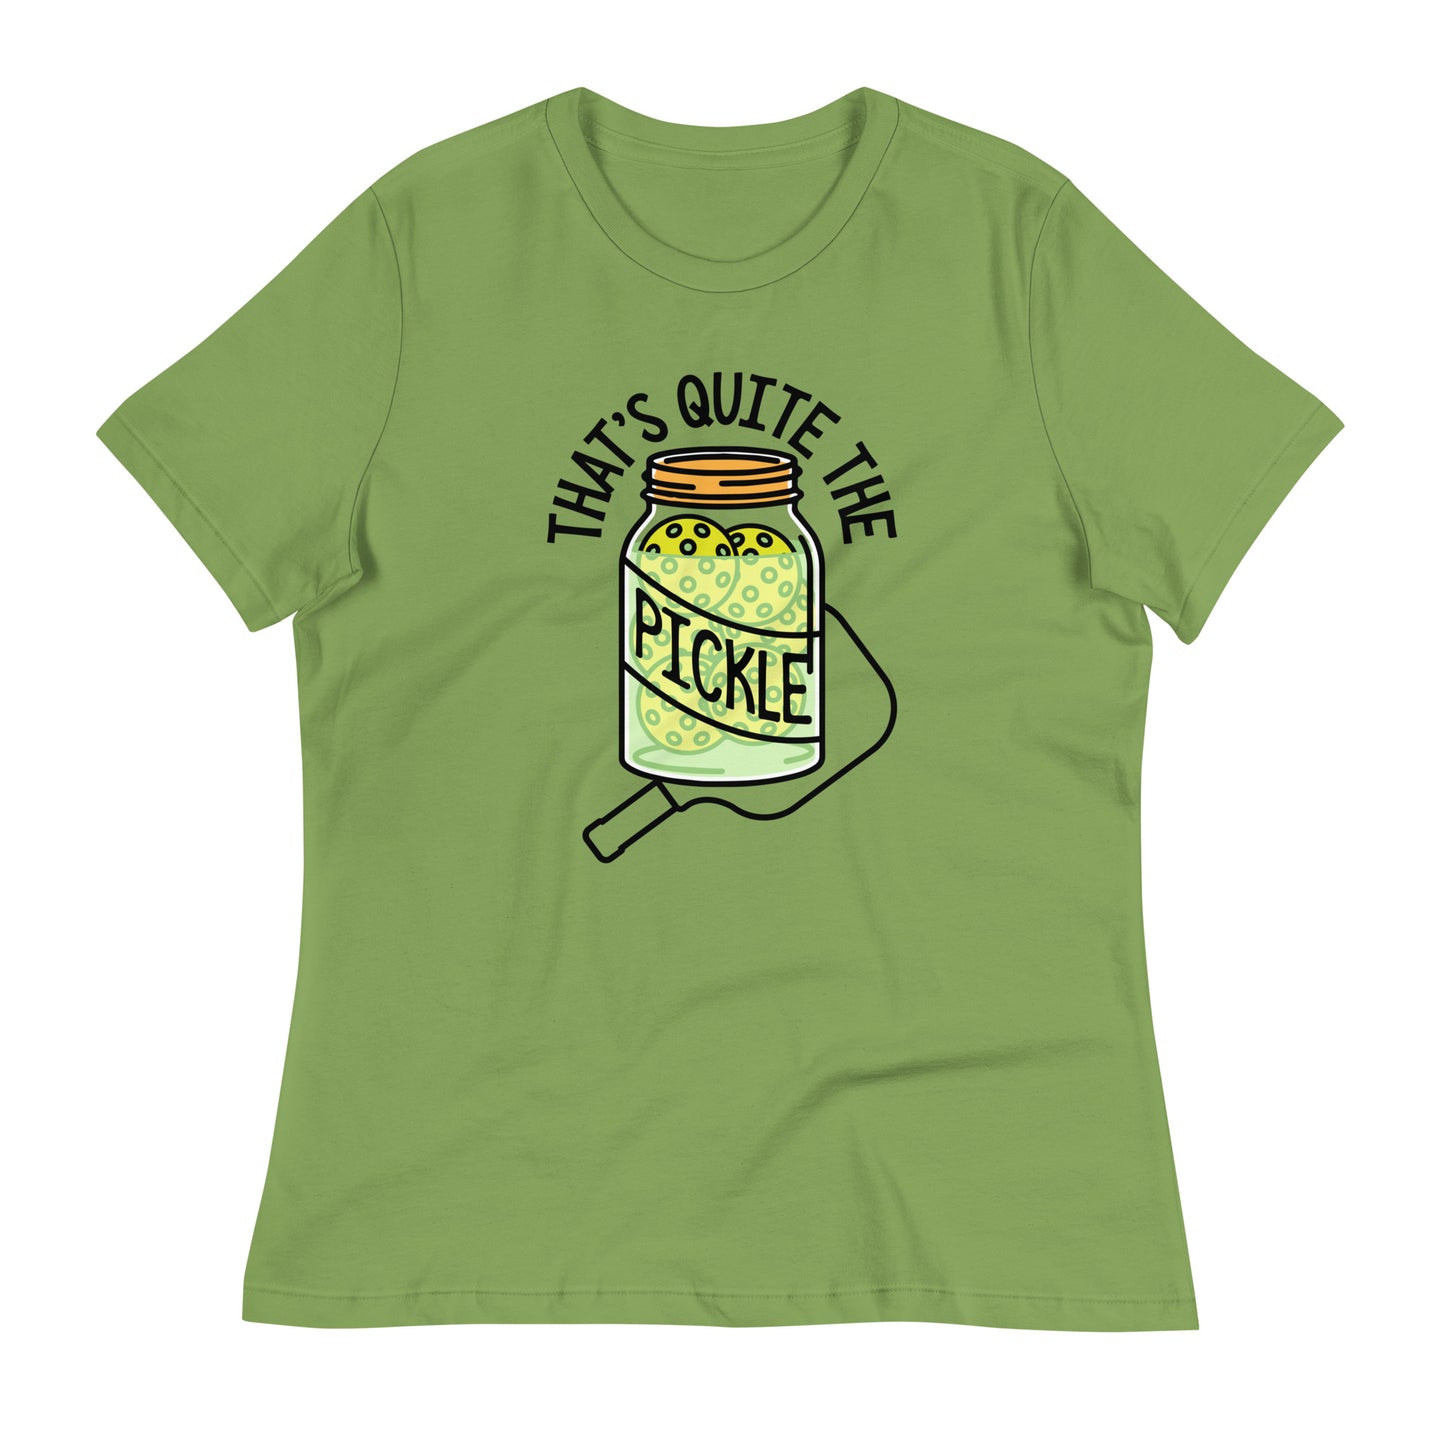 That's Quite The Pickle Women's Signature Tee